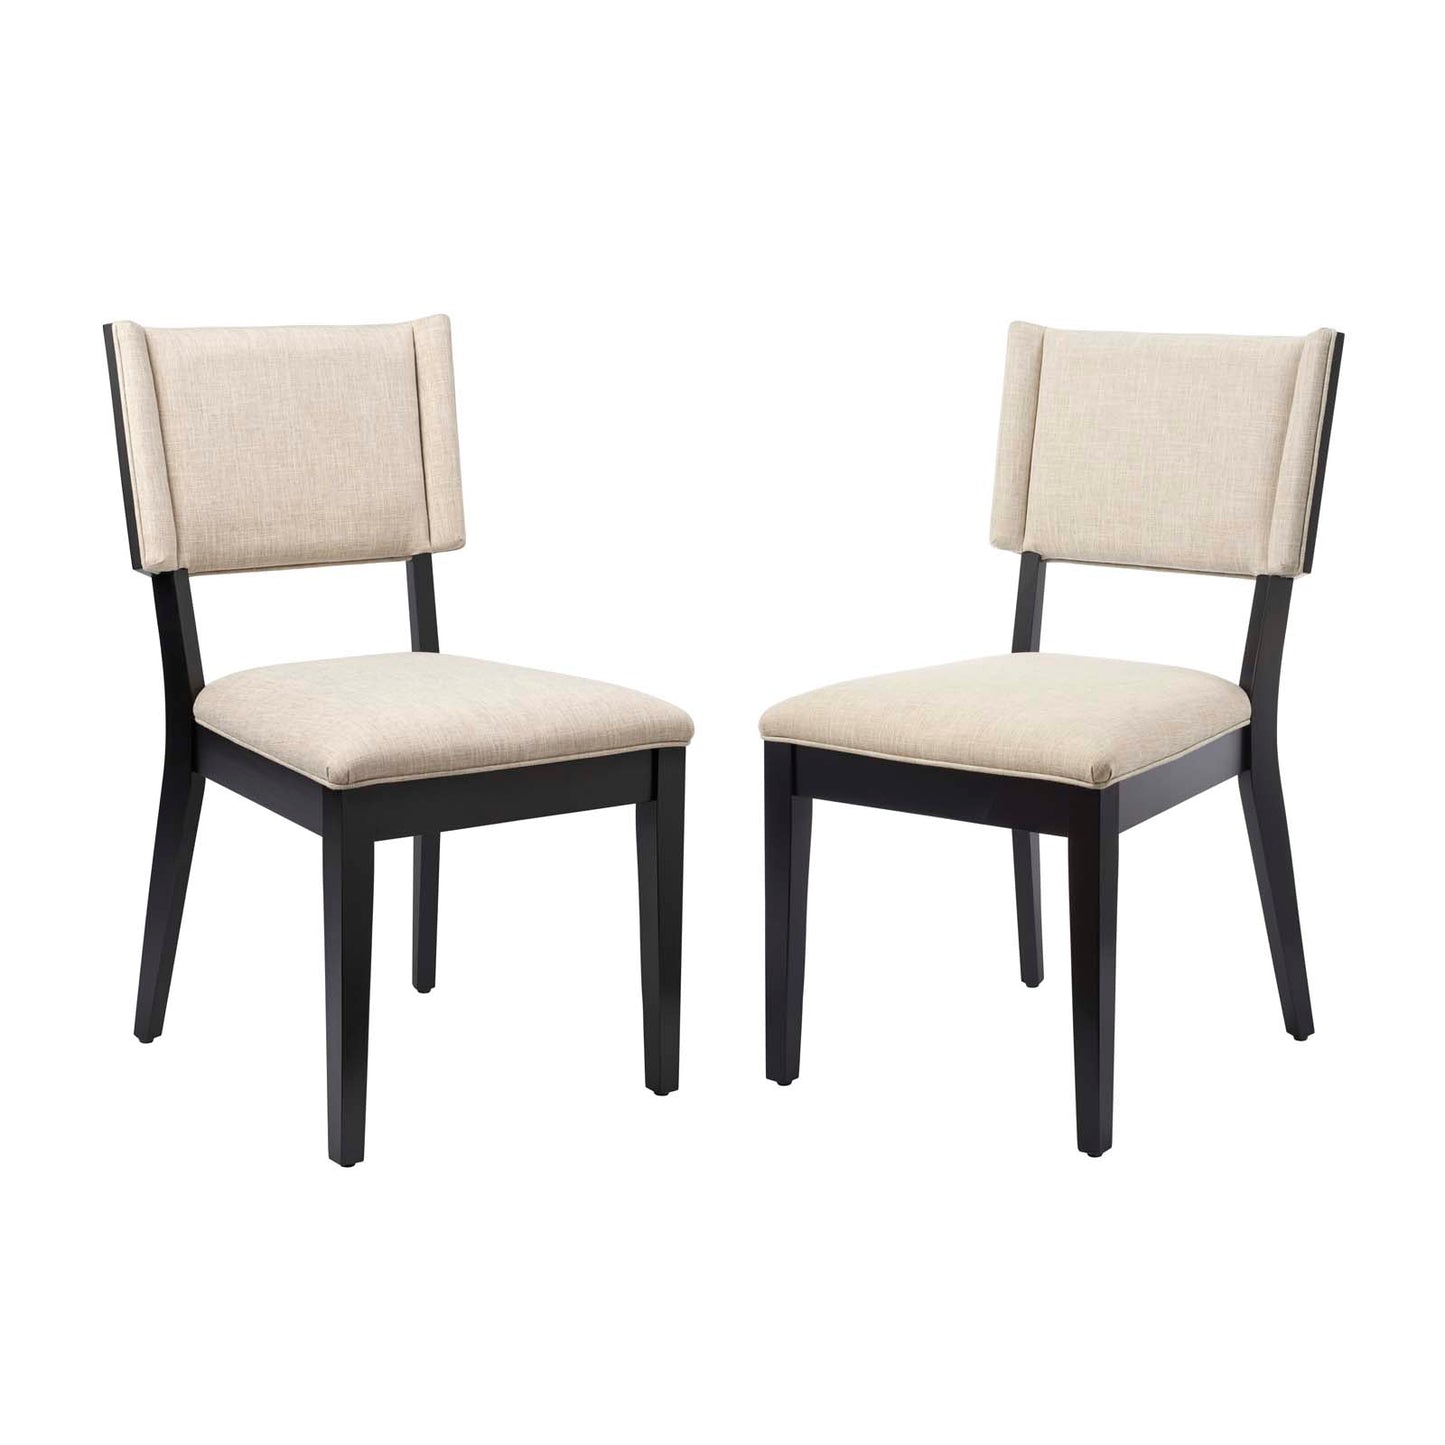 Esquire Dining Chairs - Set of 2 Beige EEI-4559-BEI